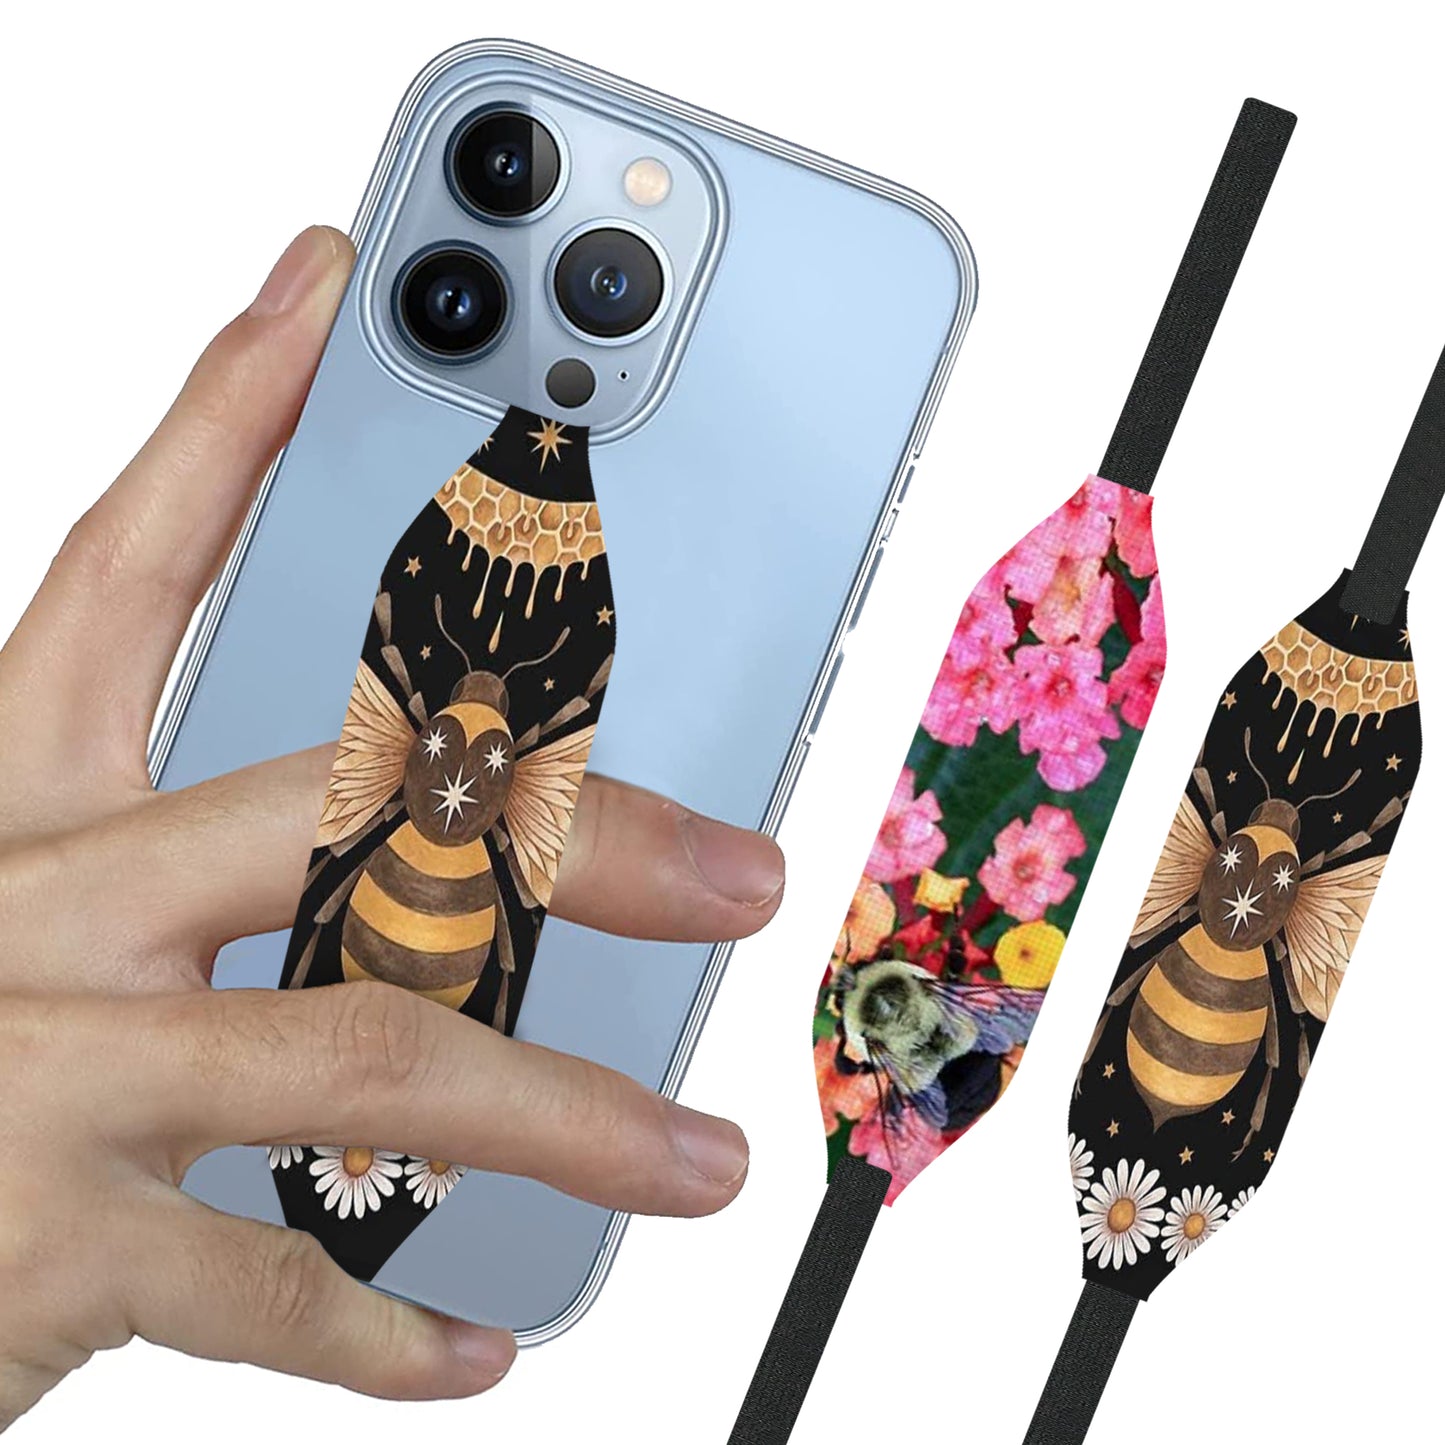 Switchbands Universal Stretchable Phone Hand Straps And Finger Loop For Phone Case - Yellow & Colorful Wallpaper